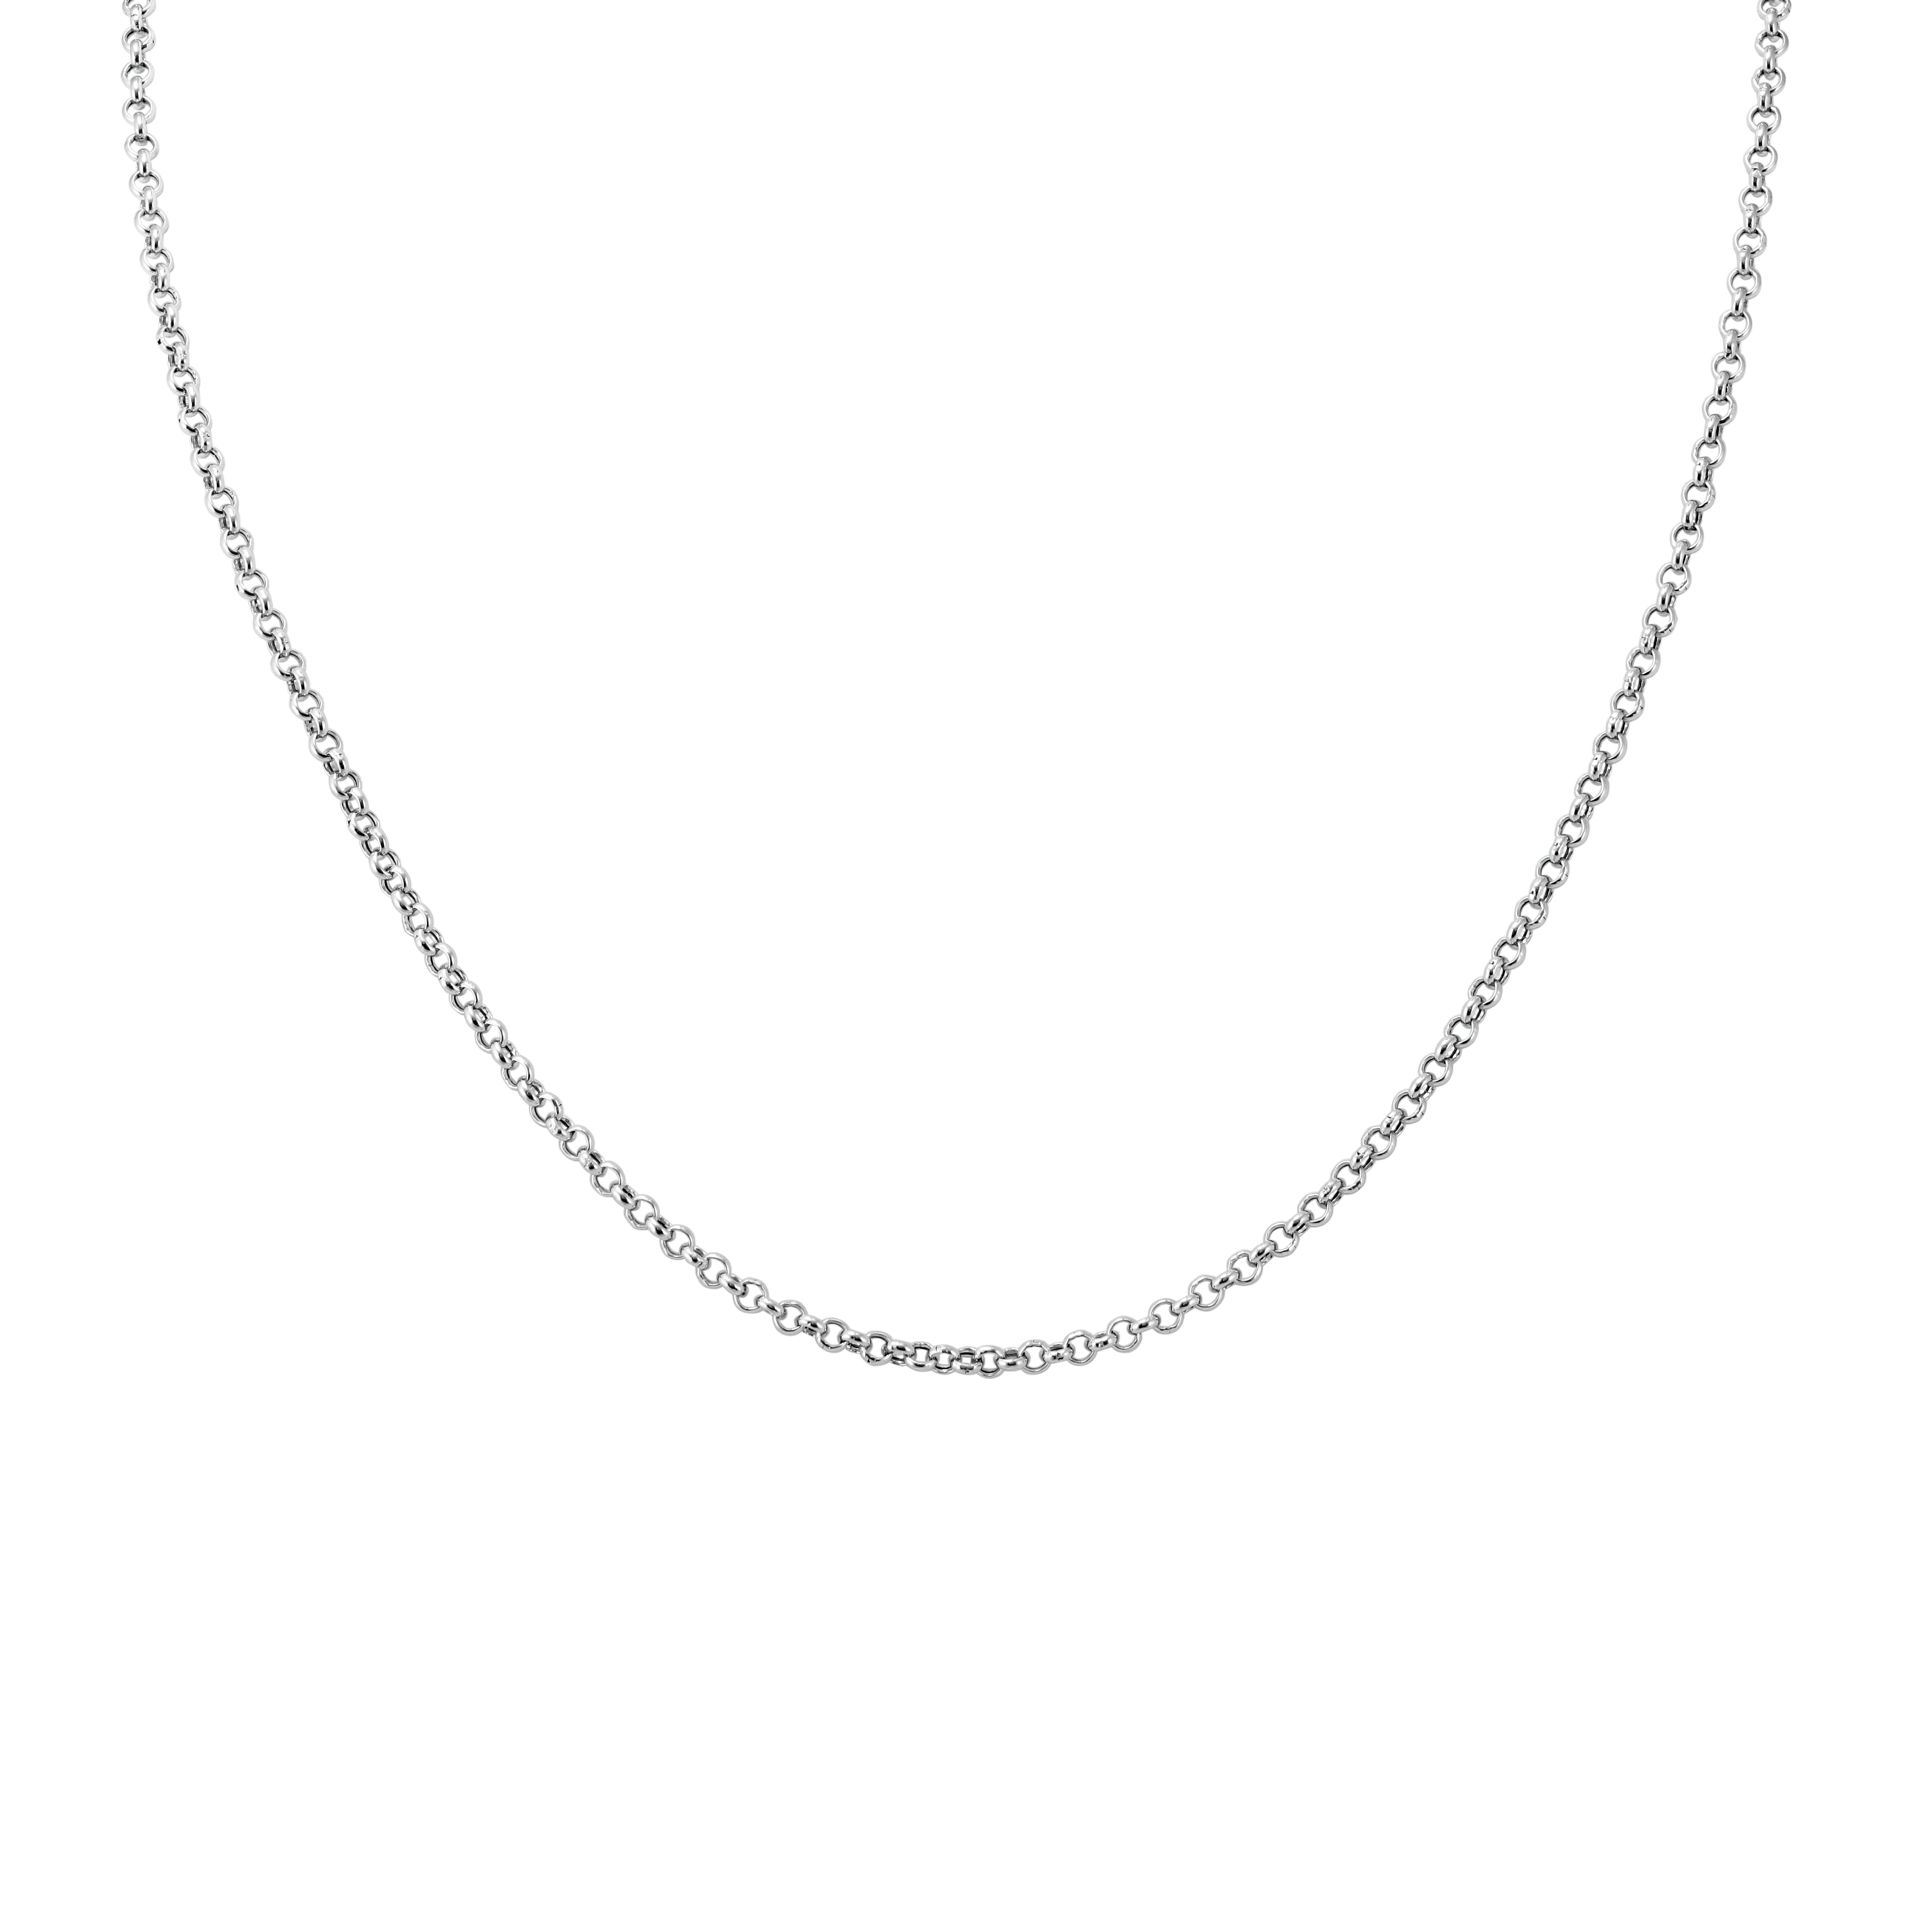 14K White Gold 2.3mm Rolo Chain with Lobster Clasp - 30 Inch